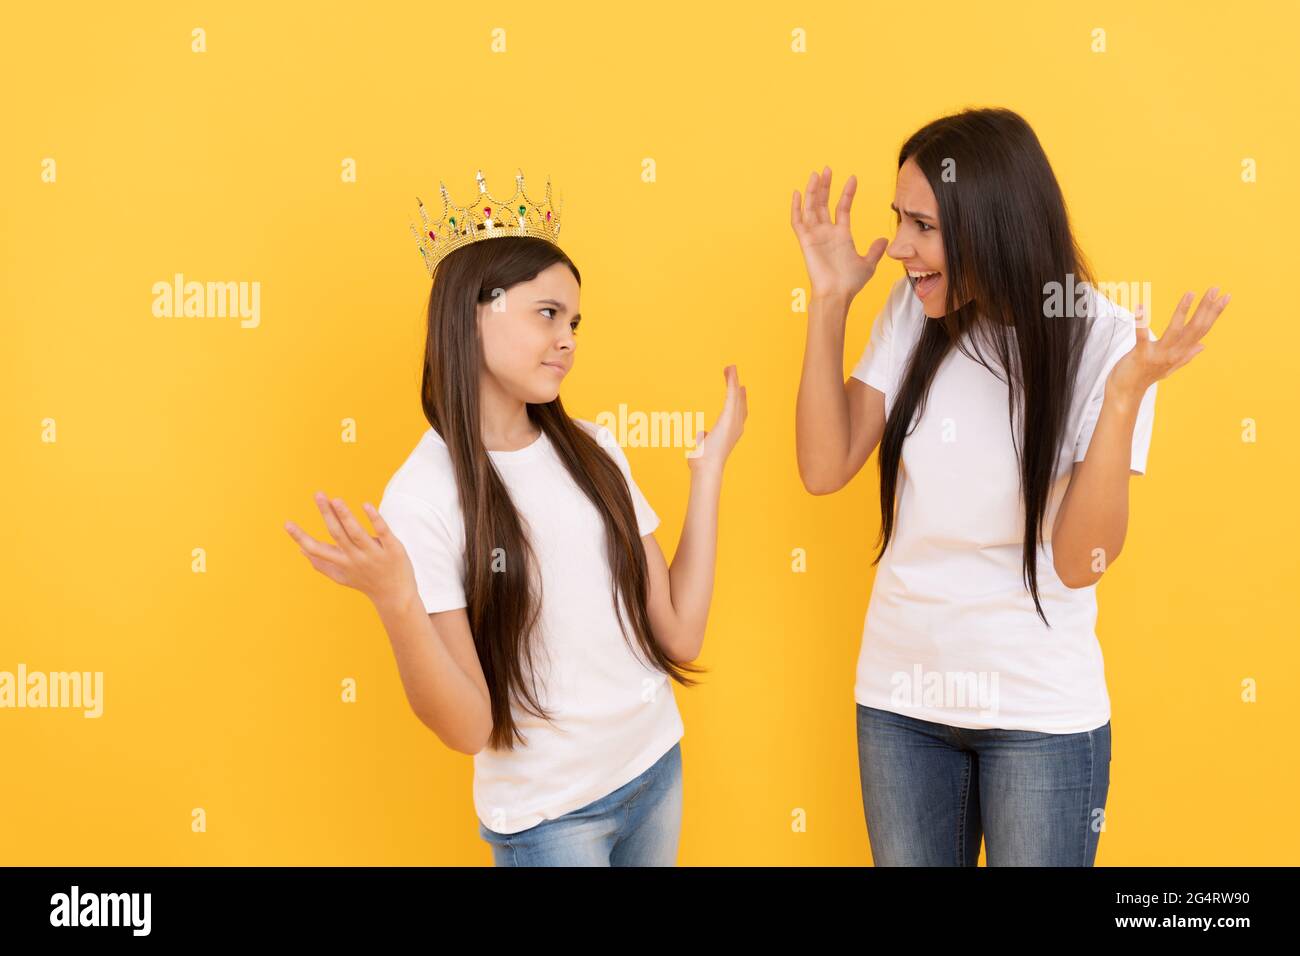 angry mom scold stubborn fussy kid. ignore parent. shout at difficult child. smug. Stock Photo